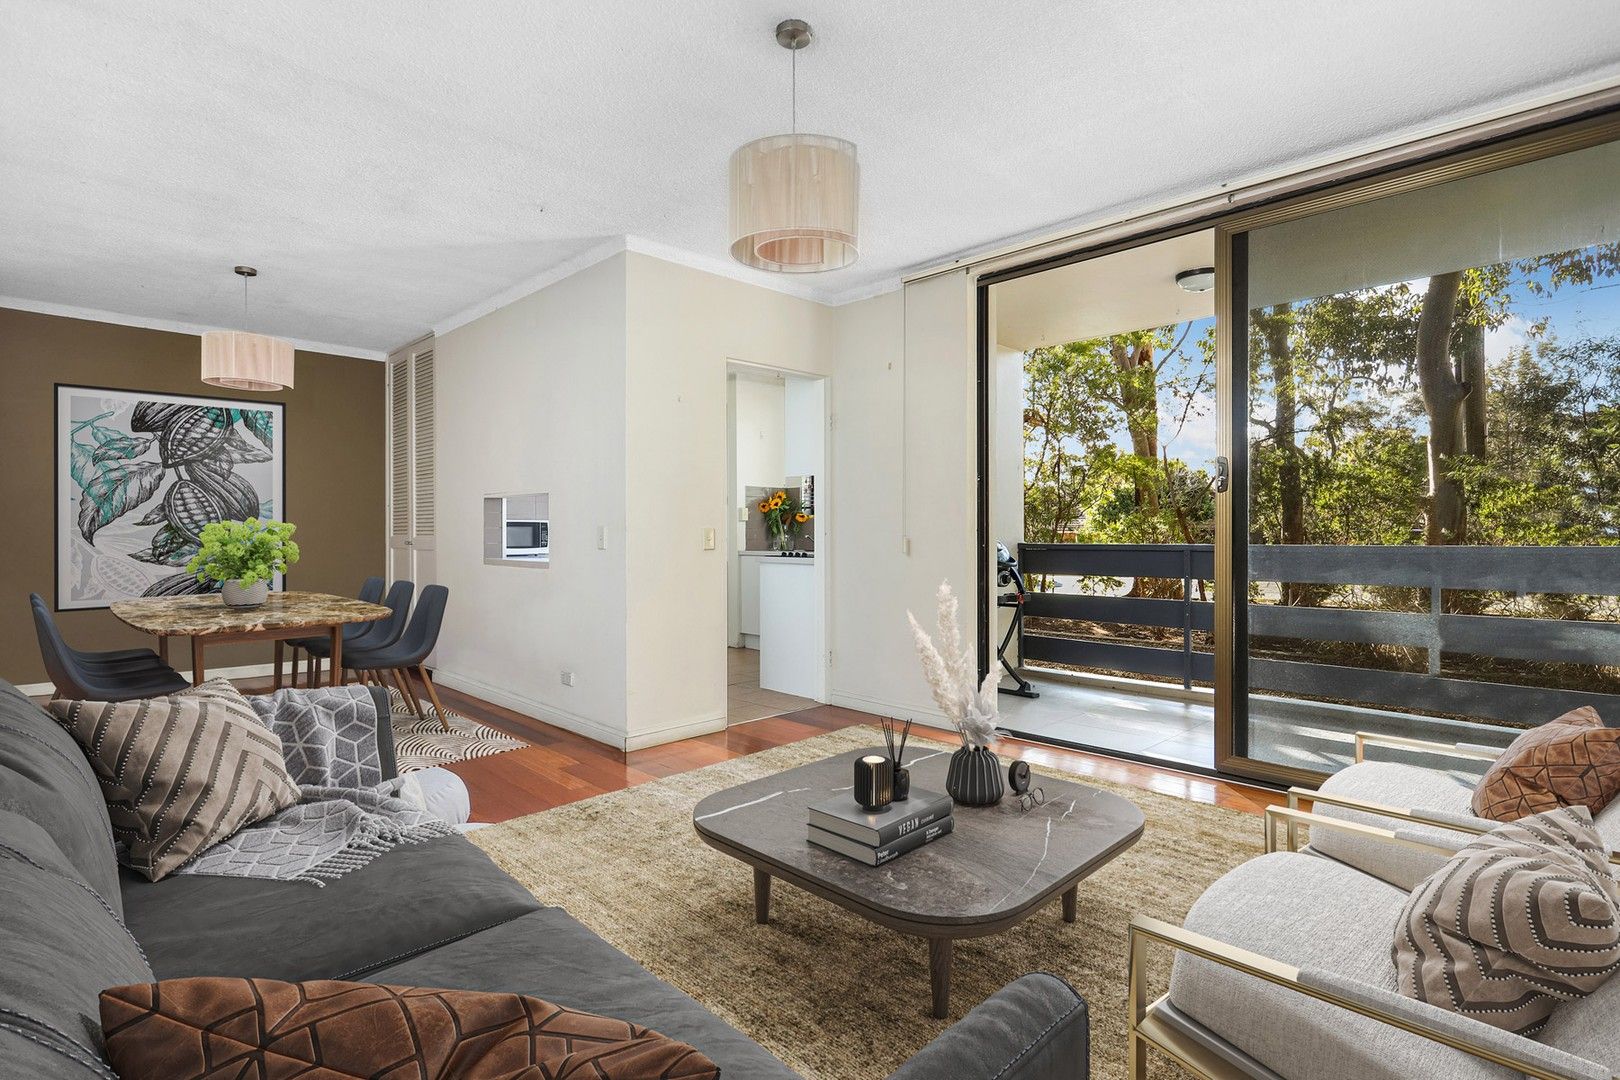 5/438 Mowbray Road West, Lane Cove North NSW 2066, Image 0